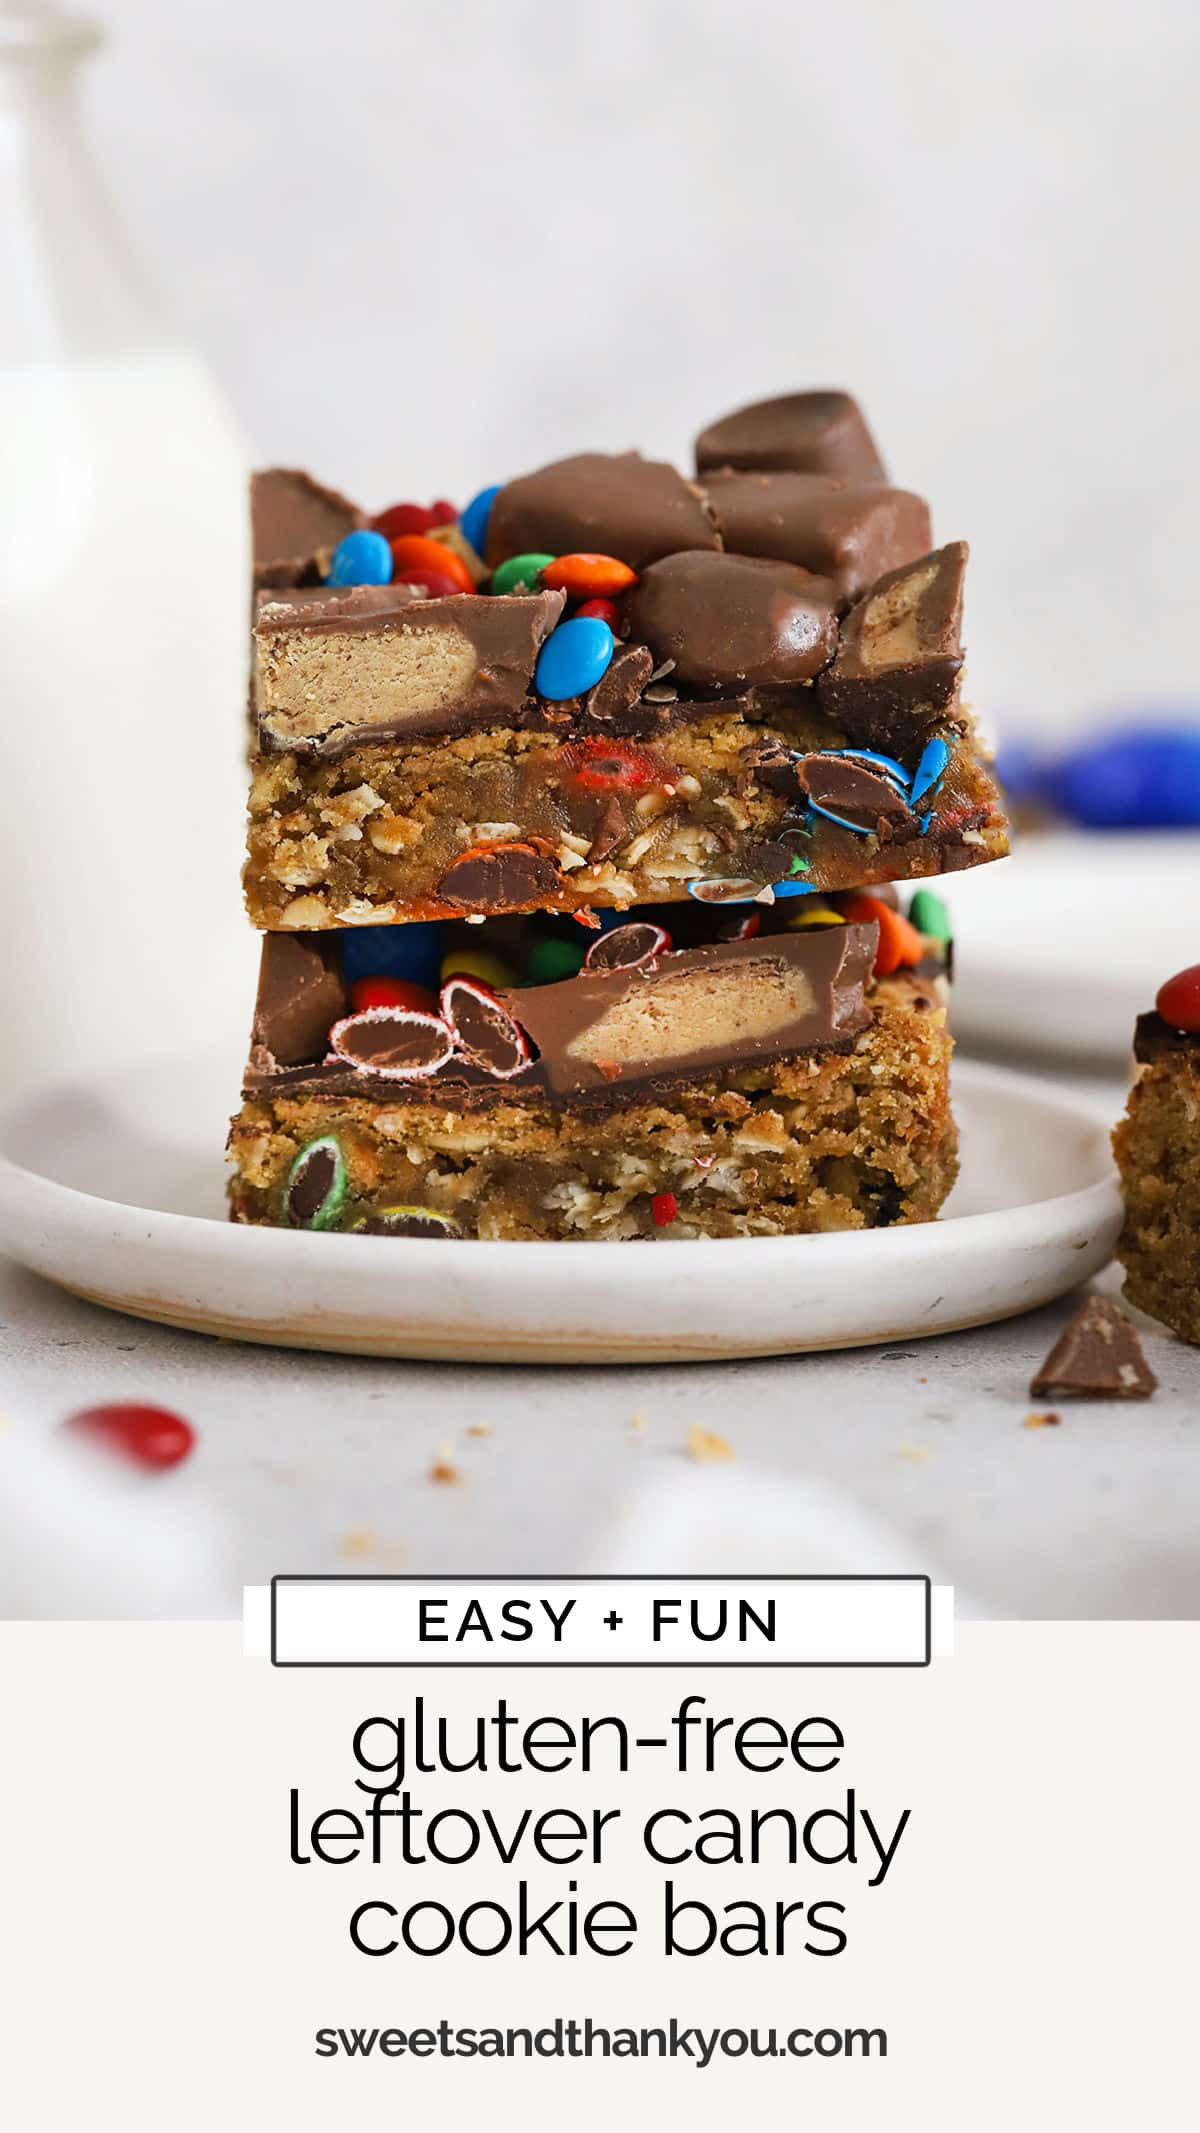 These gluten-free candy cookie bars a fun spin on classic monster cookie bars. They're the perfect way to use leftover candy! / halloween candy cookie bars recipe / leftover candy cookie bars recipe / ways to use leftover candy / recipes for leftover candy / cookie bars with candy / which candy bars are gluten free / baking recipes with leftover candy / ways to use leftover halloween candy / what to bake with leftover candy